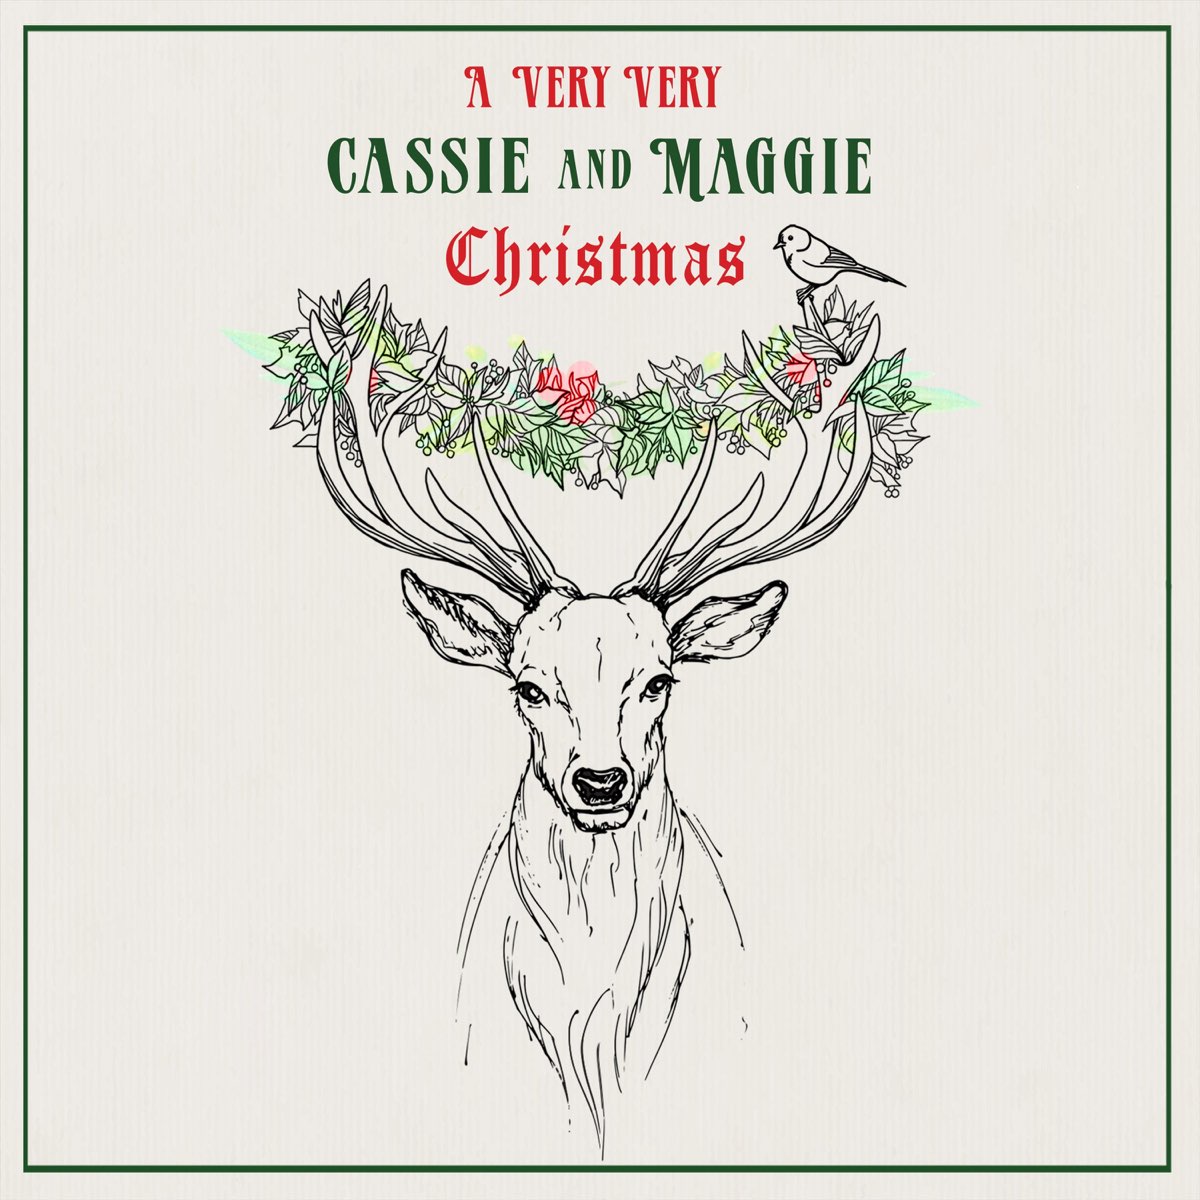 ‎A Very Very Cassie and Maggie Christmas par Cassie and Maggie sur ...